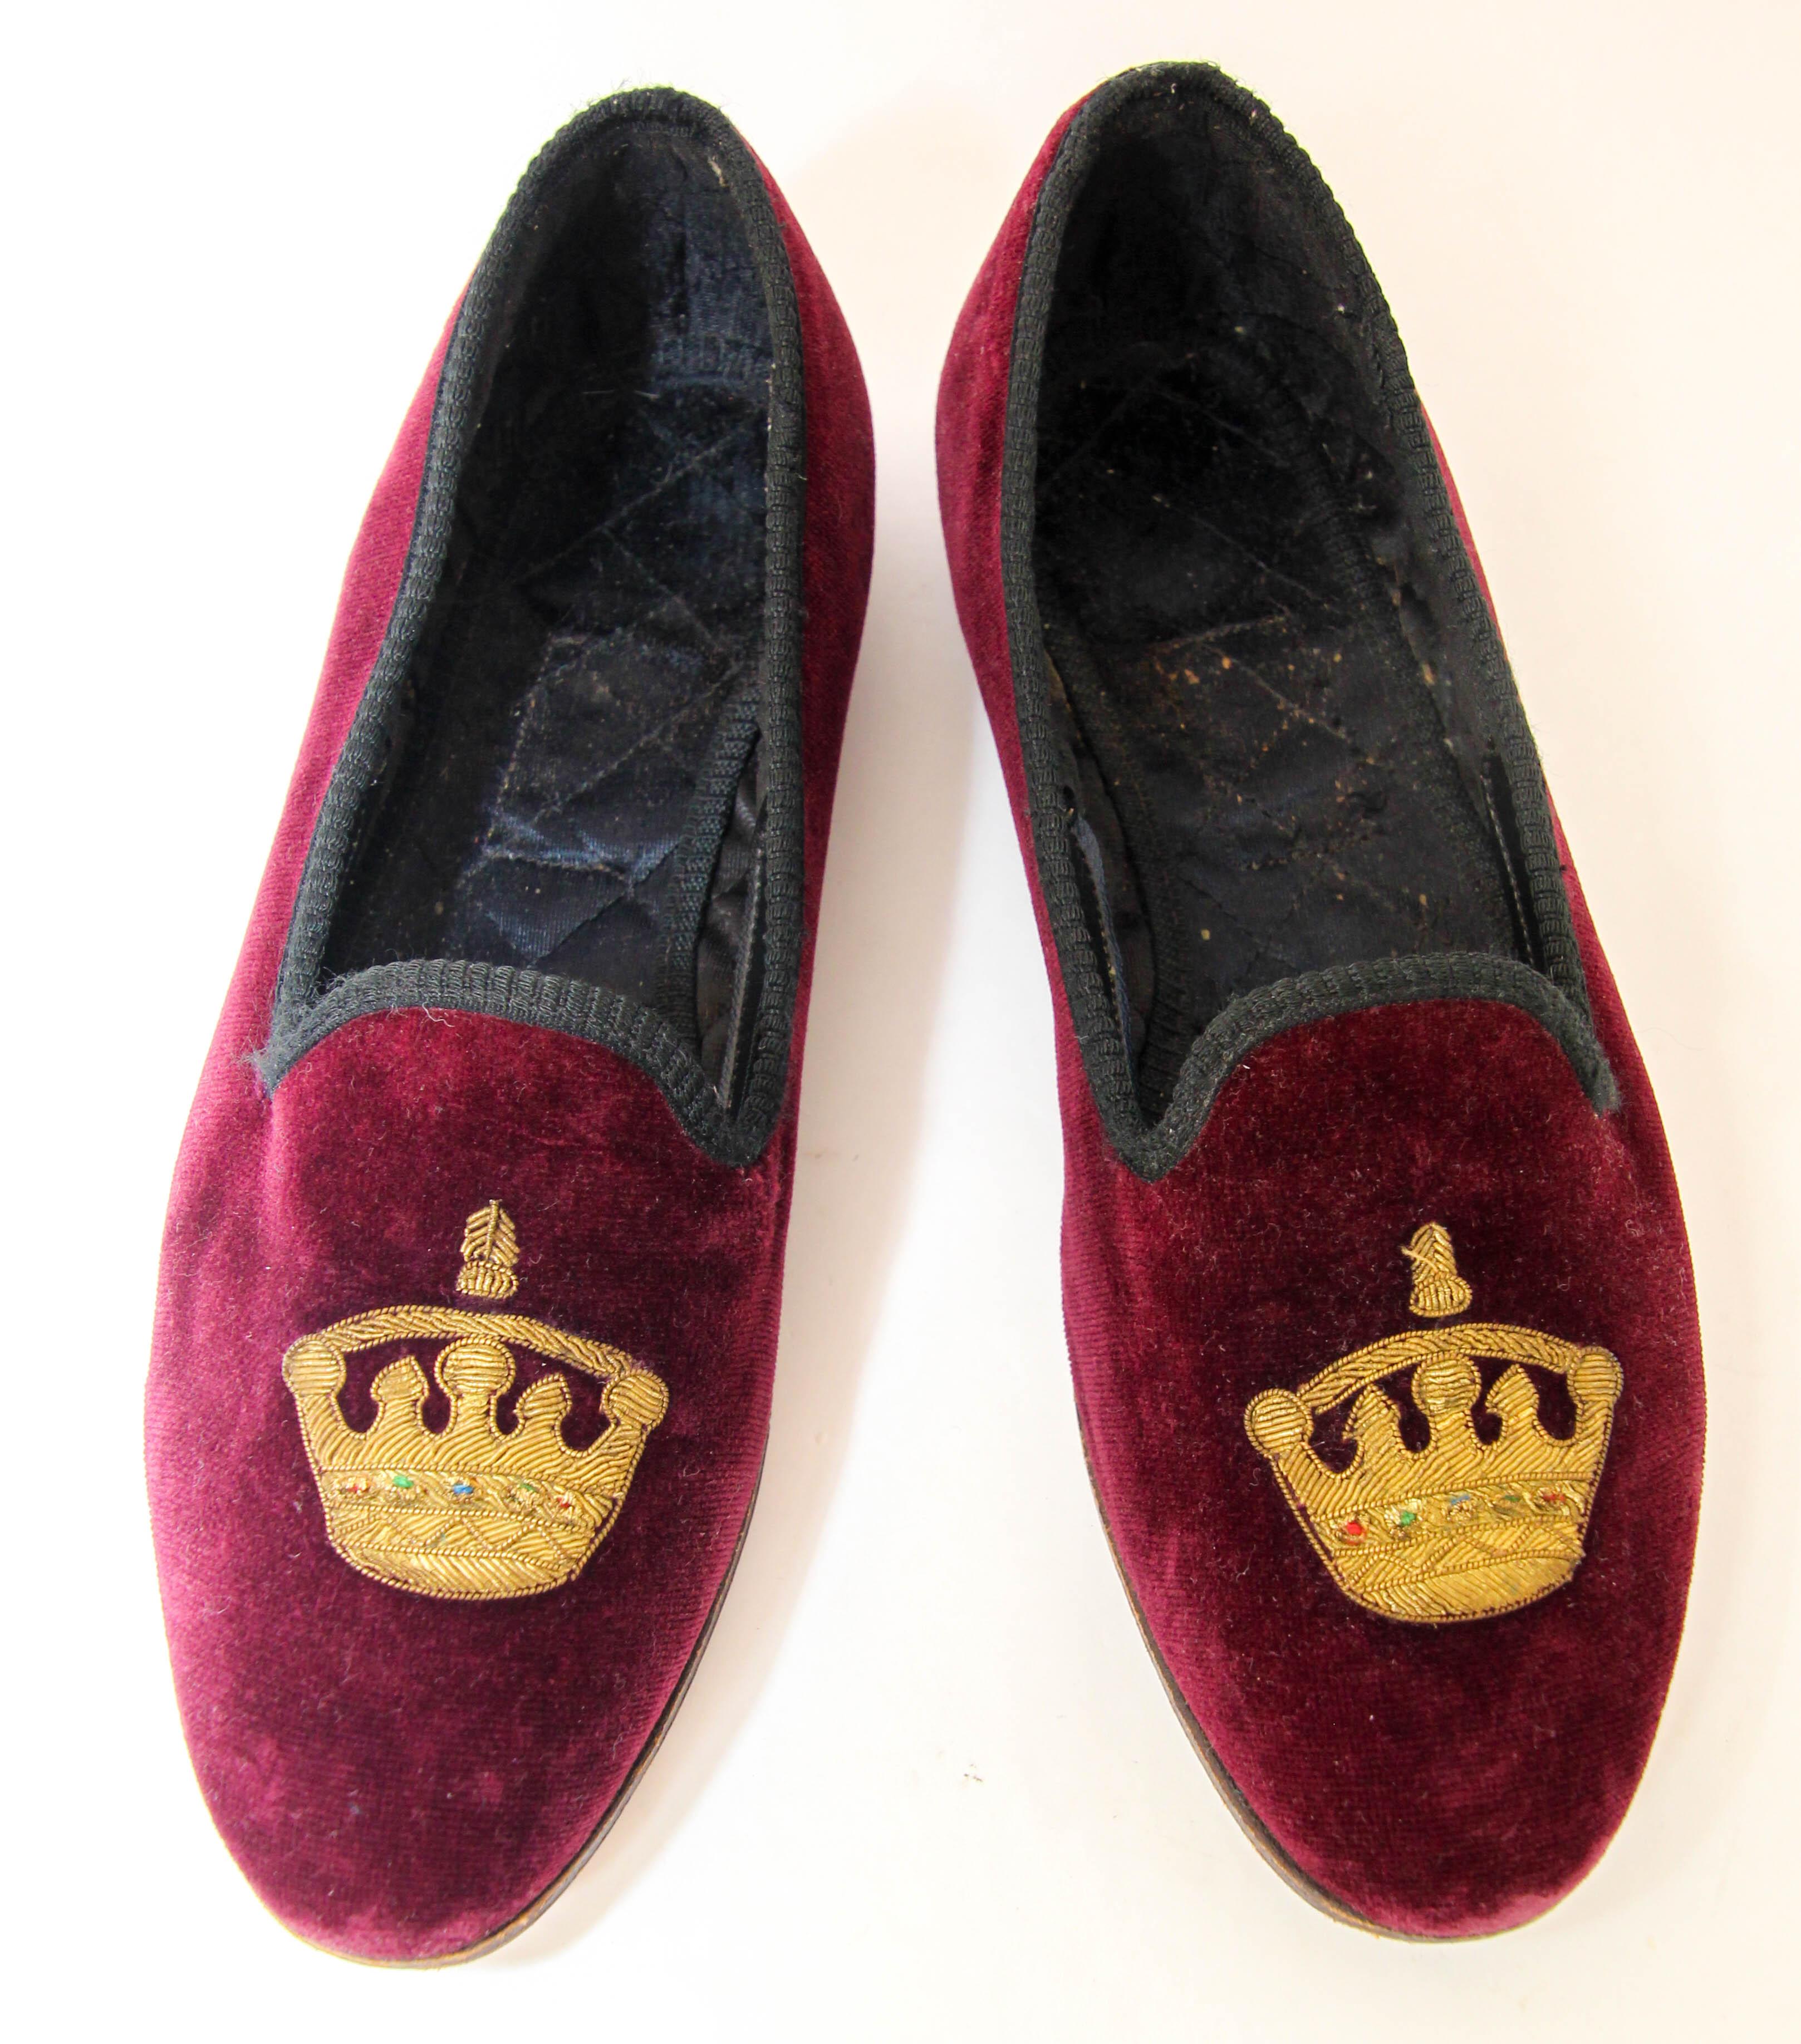 Vintage British crown hand made in England Velvet Slippers Size 6.5.
Unisex luxury hand-made, velvet oxford loafer flats shoes, leather-soled velvet loafers, aristocratically hand embroidered with gold bullion thread royal crown.
The handcrafted